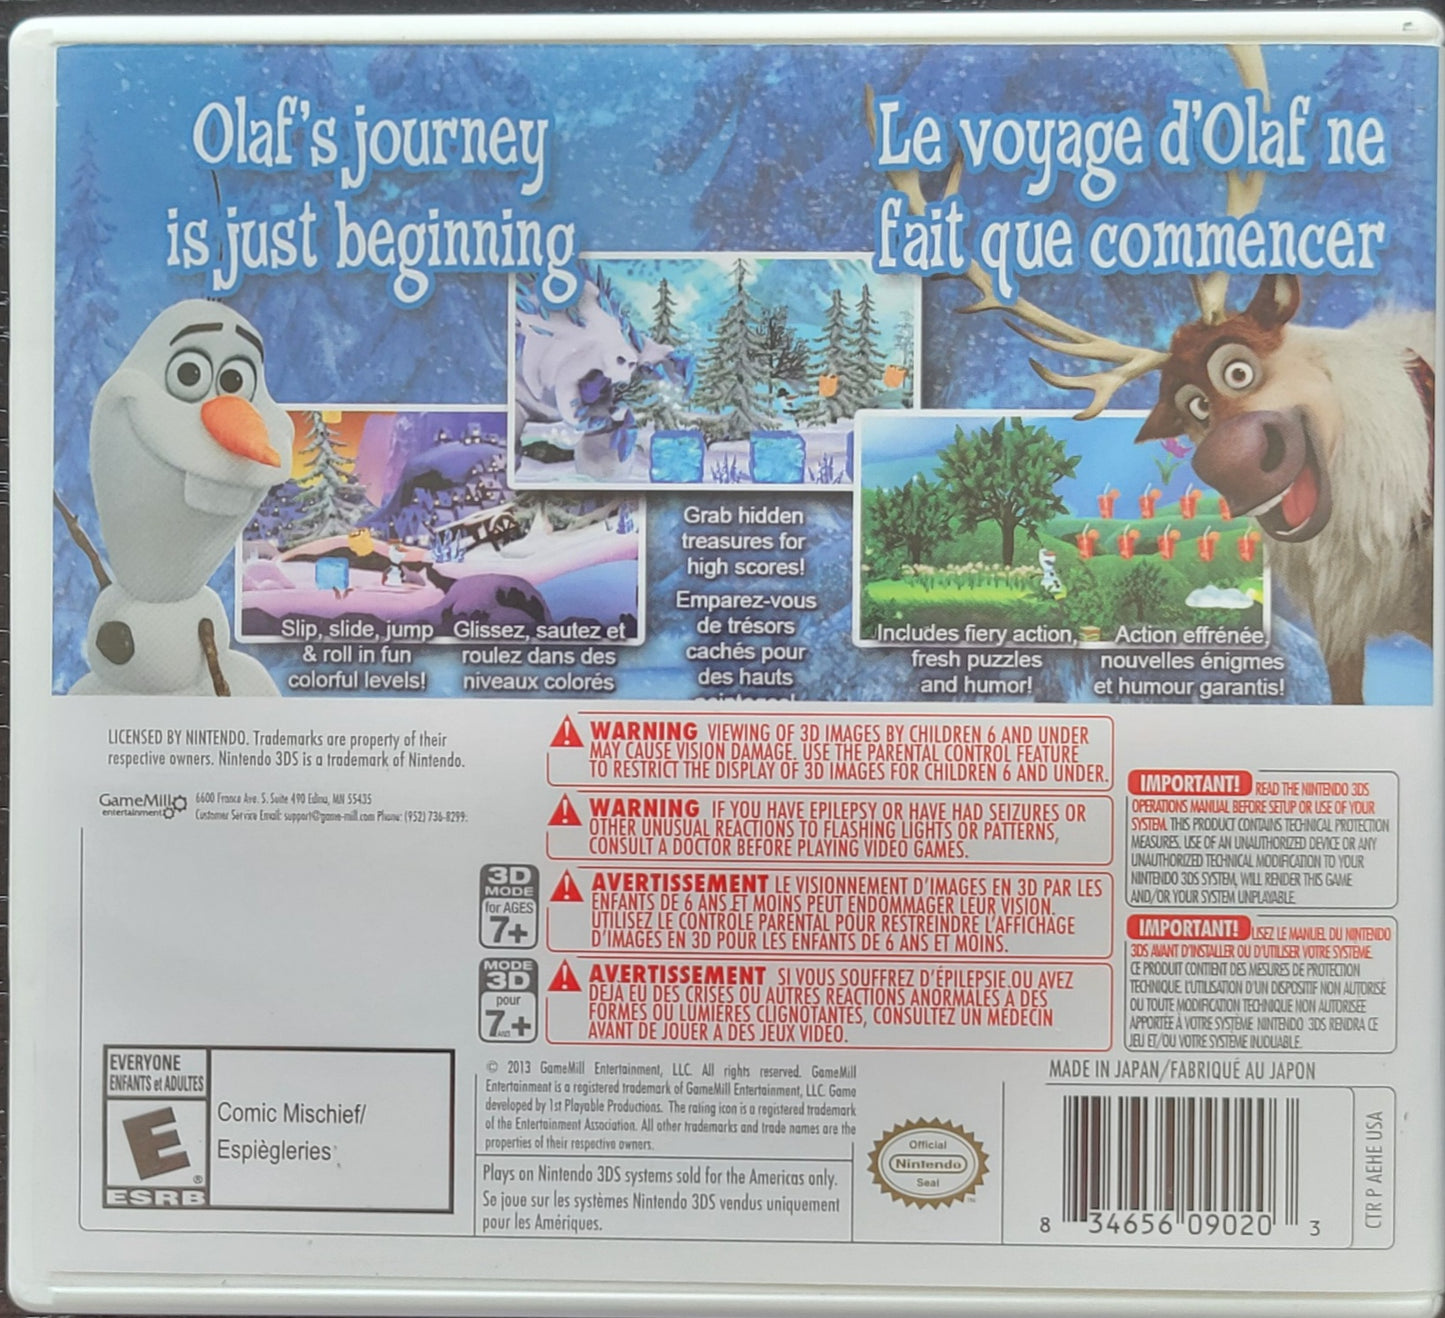 Disney's FROZEN: Olaf's Quest - Nintendo 3DS 2008 - Handheld Console NTSC Cartridge Tested & Working